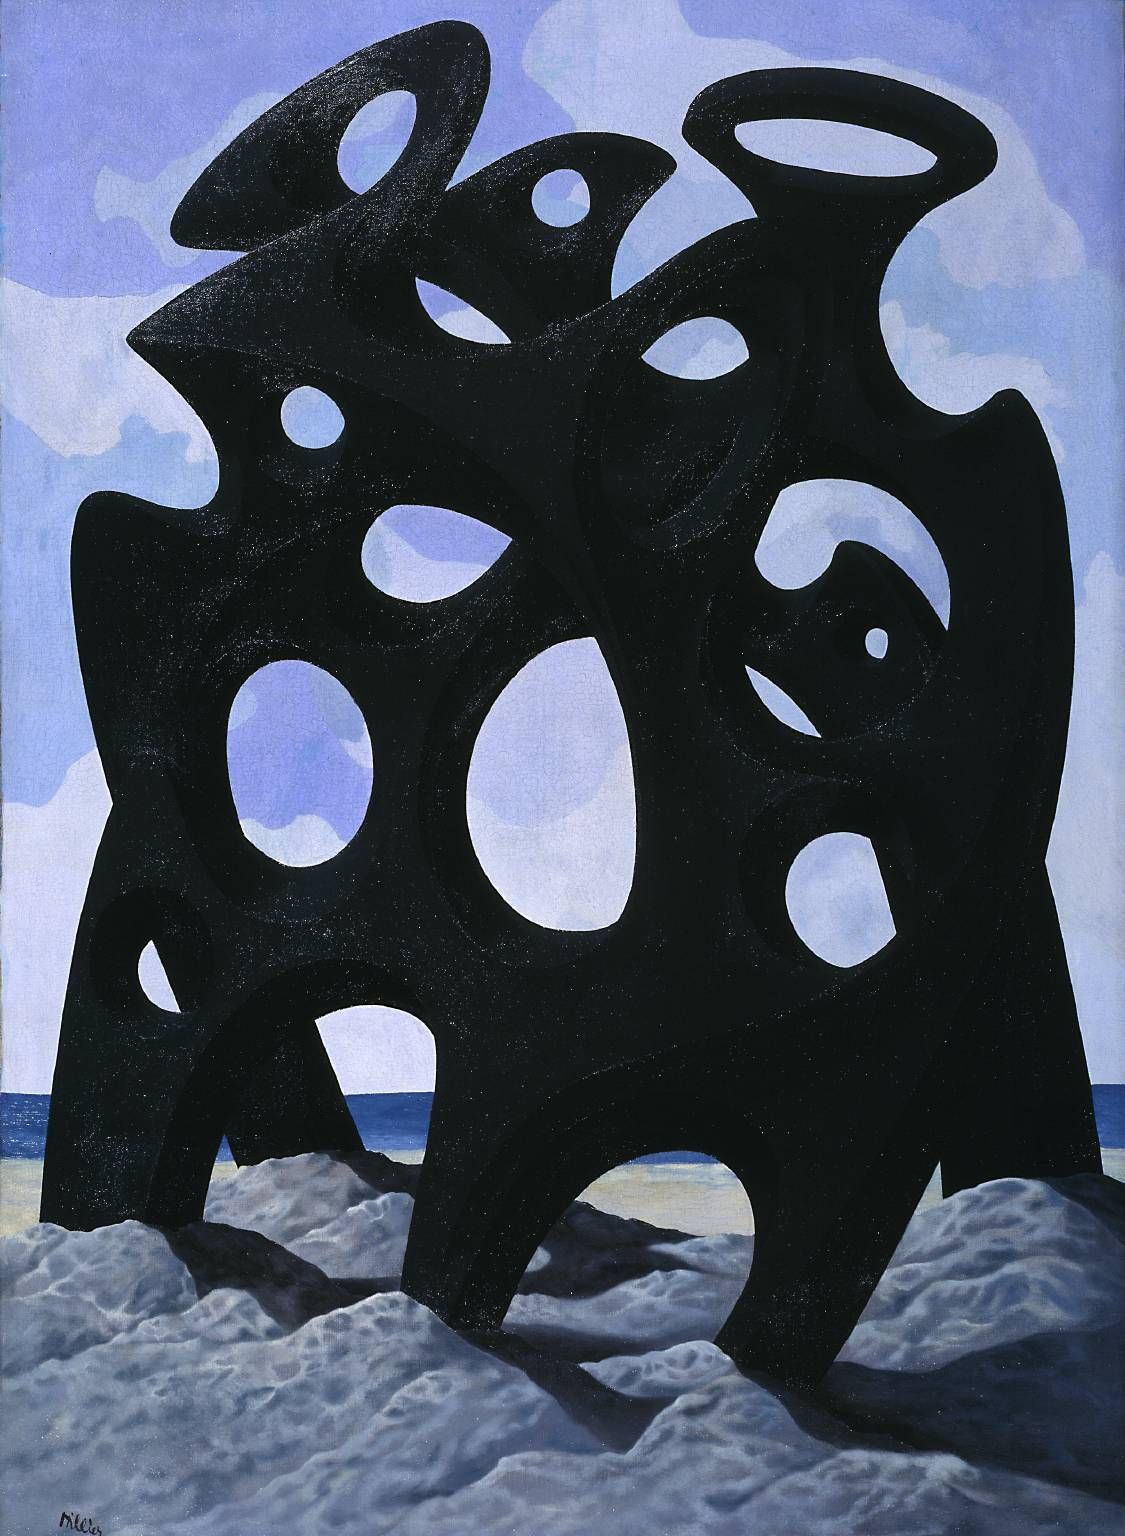 Tristram Hillier – Variation on the Form of an Anchor (1939)